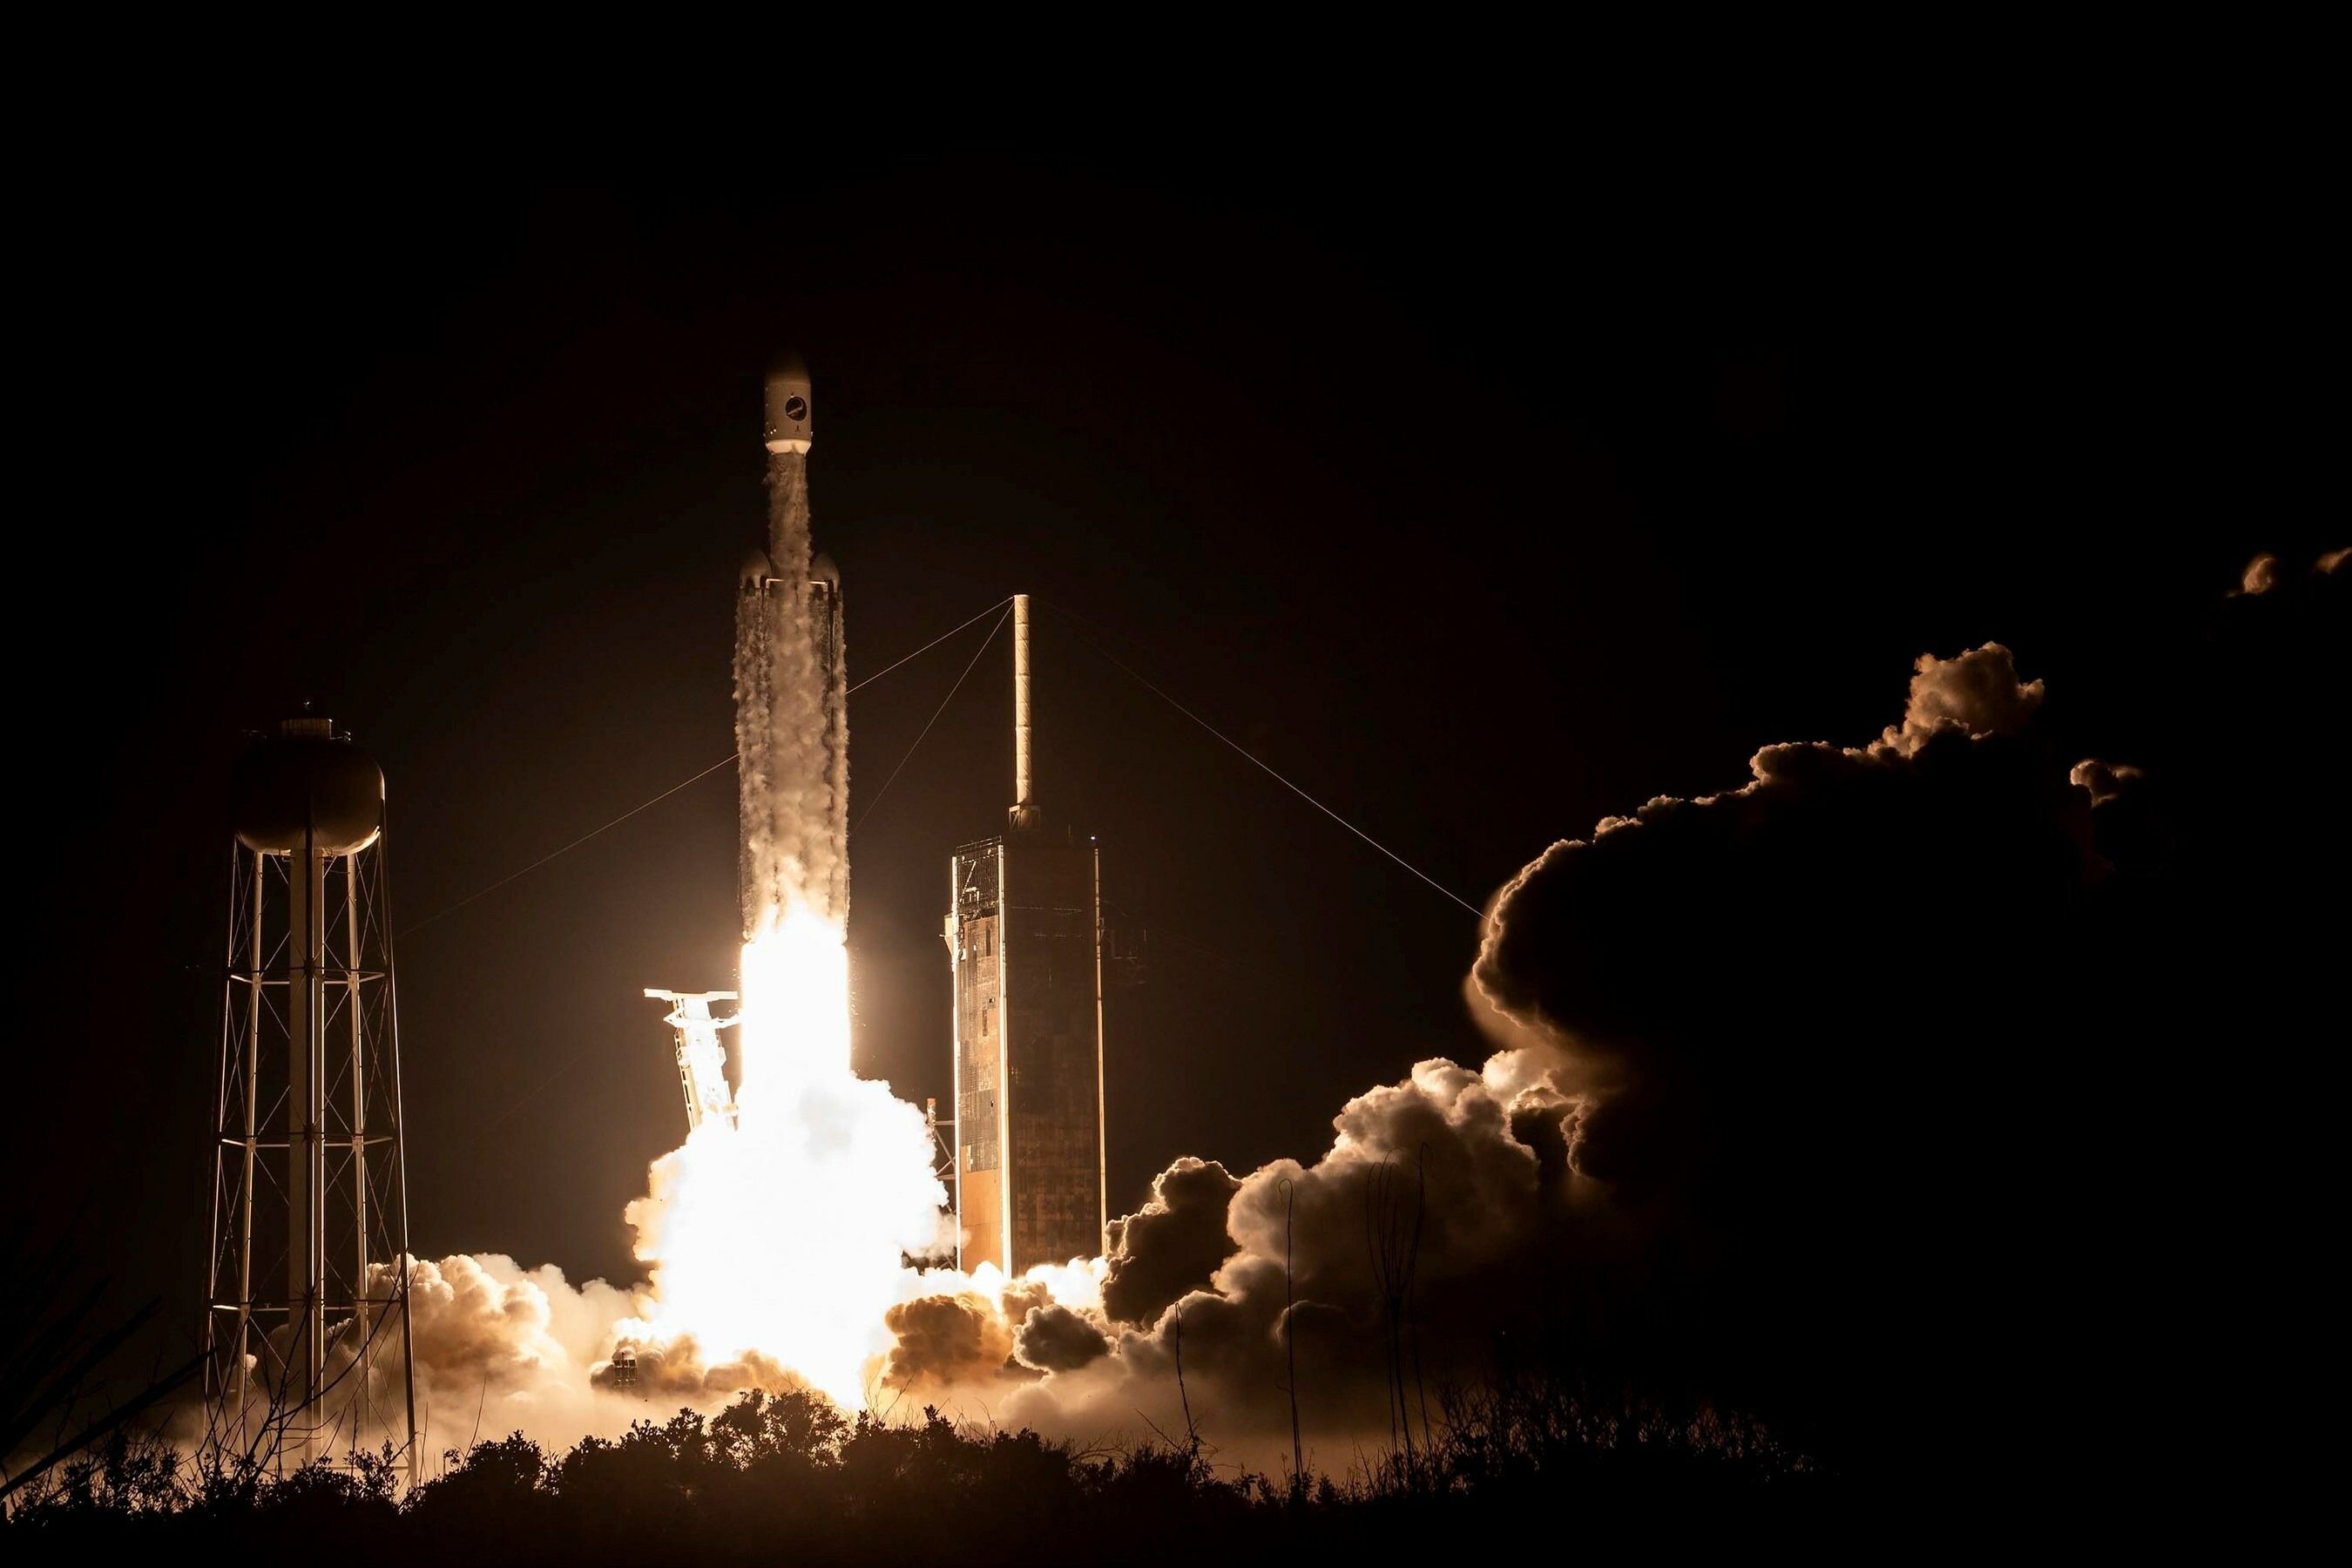 SpaceX's Falcon Heavy launches from Cape Canaveral carrying OTV-7 